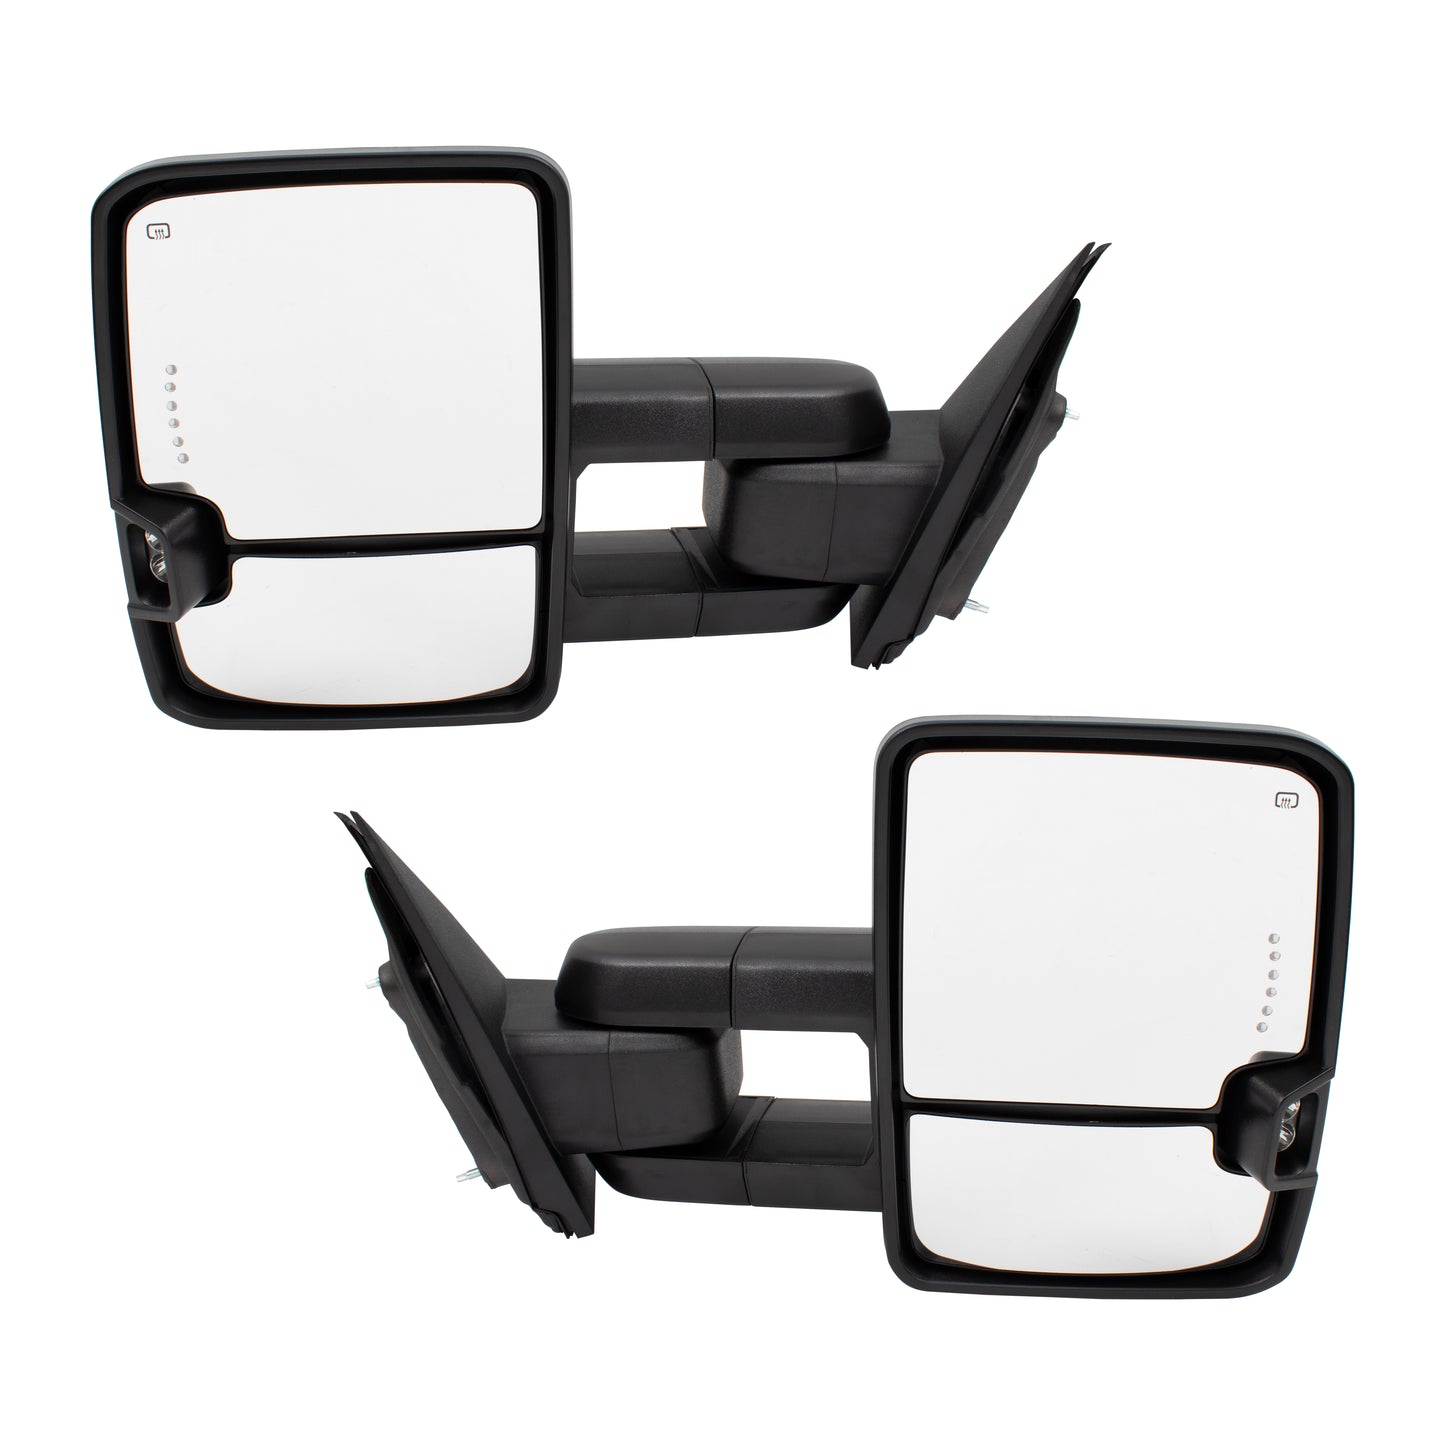 Brock Replacement Performance Upgrade Tow Mirrors Chrome Power Folding Heated Telescopic Dual Arms Compatible with 2014-2018 Silverado Sierra Pickup Truck